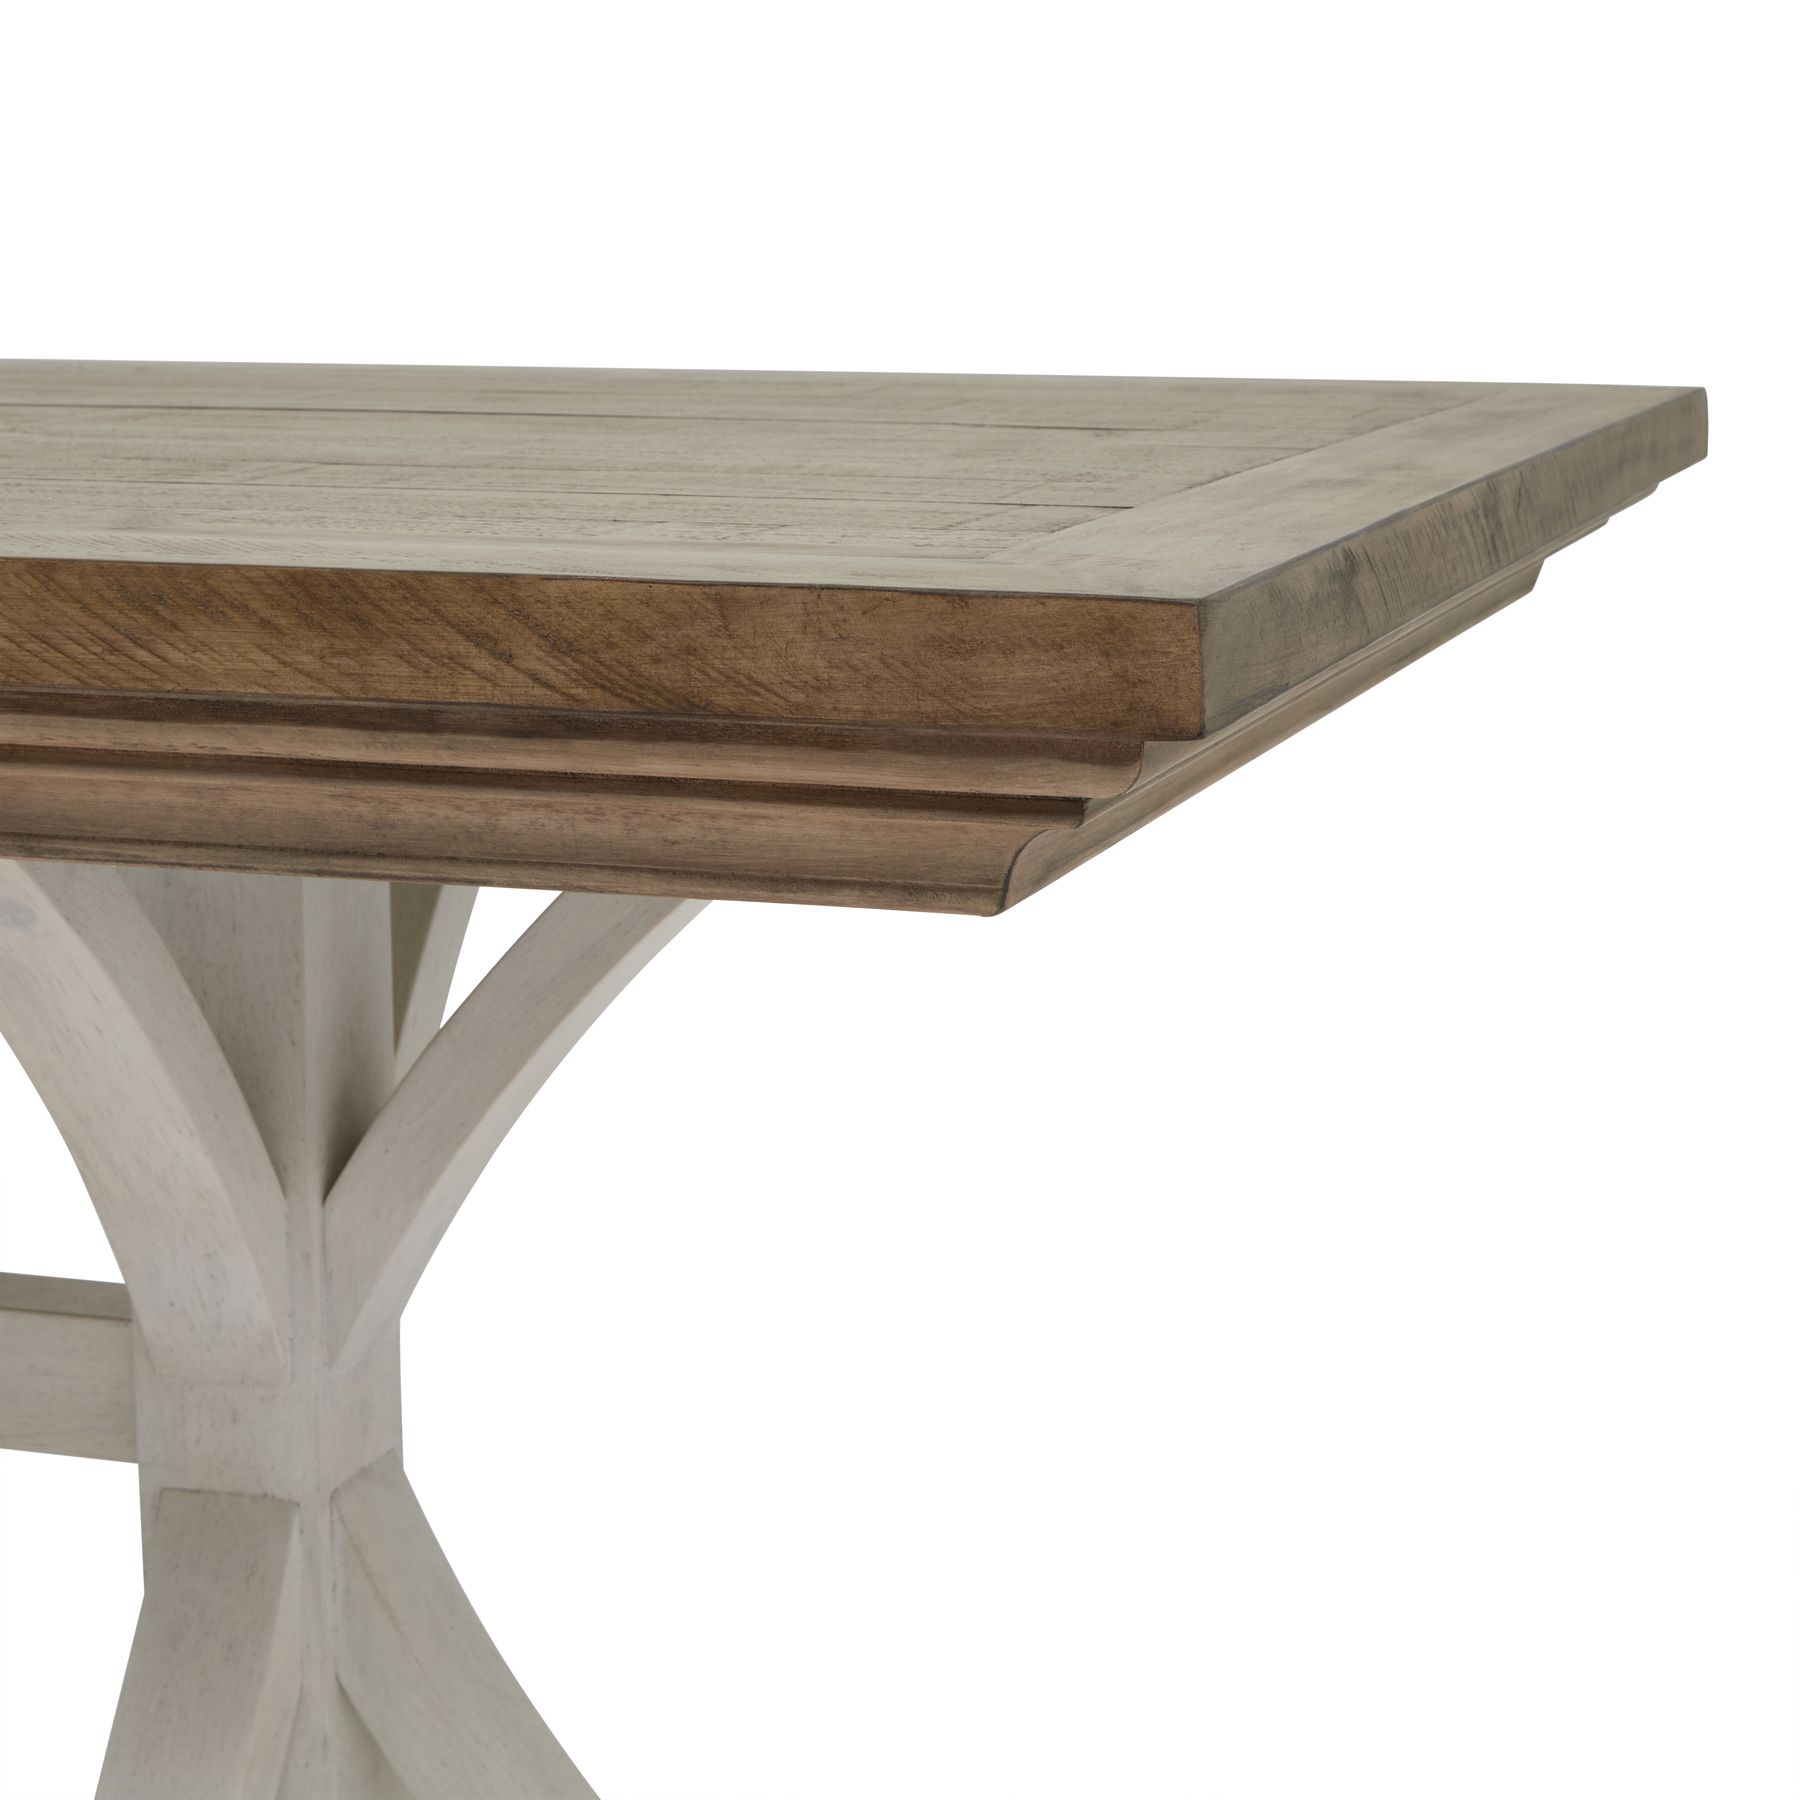 Luna Collection Rectangular Dining Table - Image 3